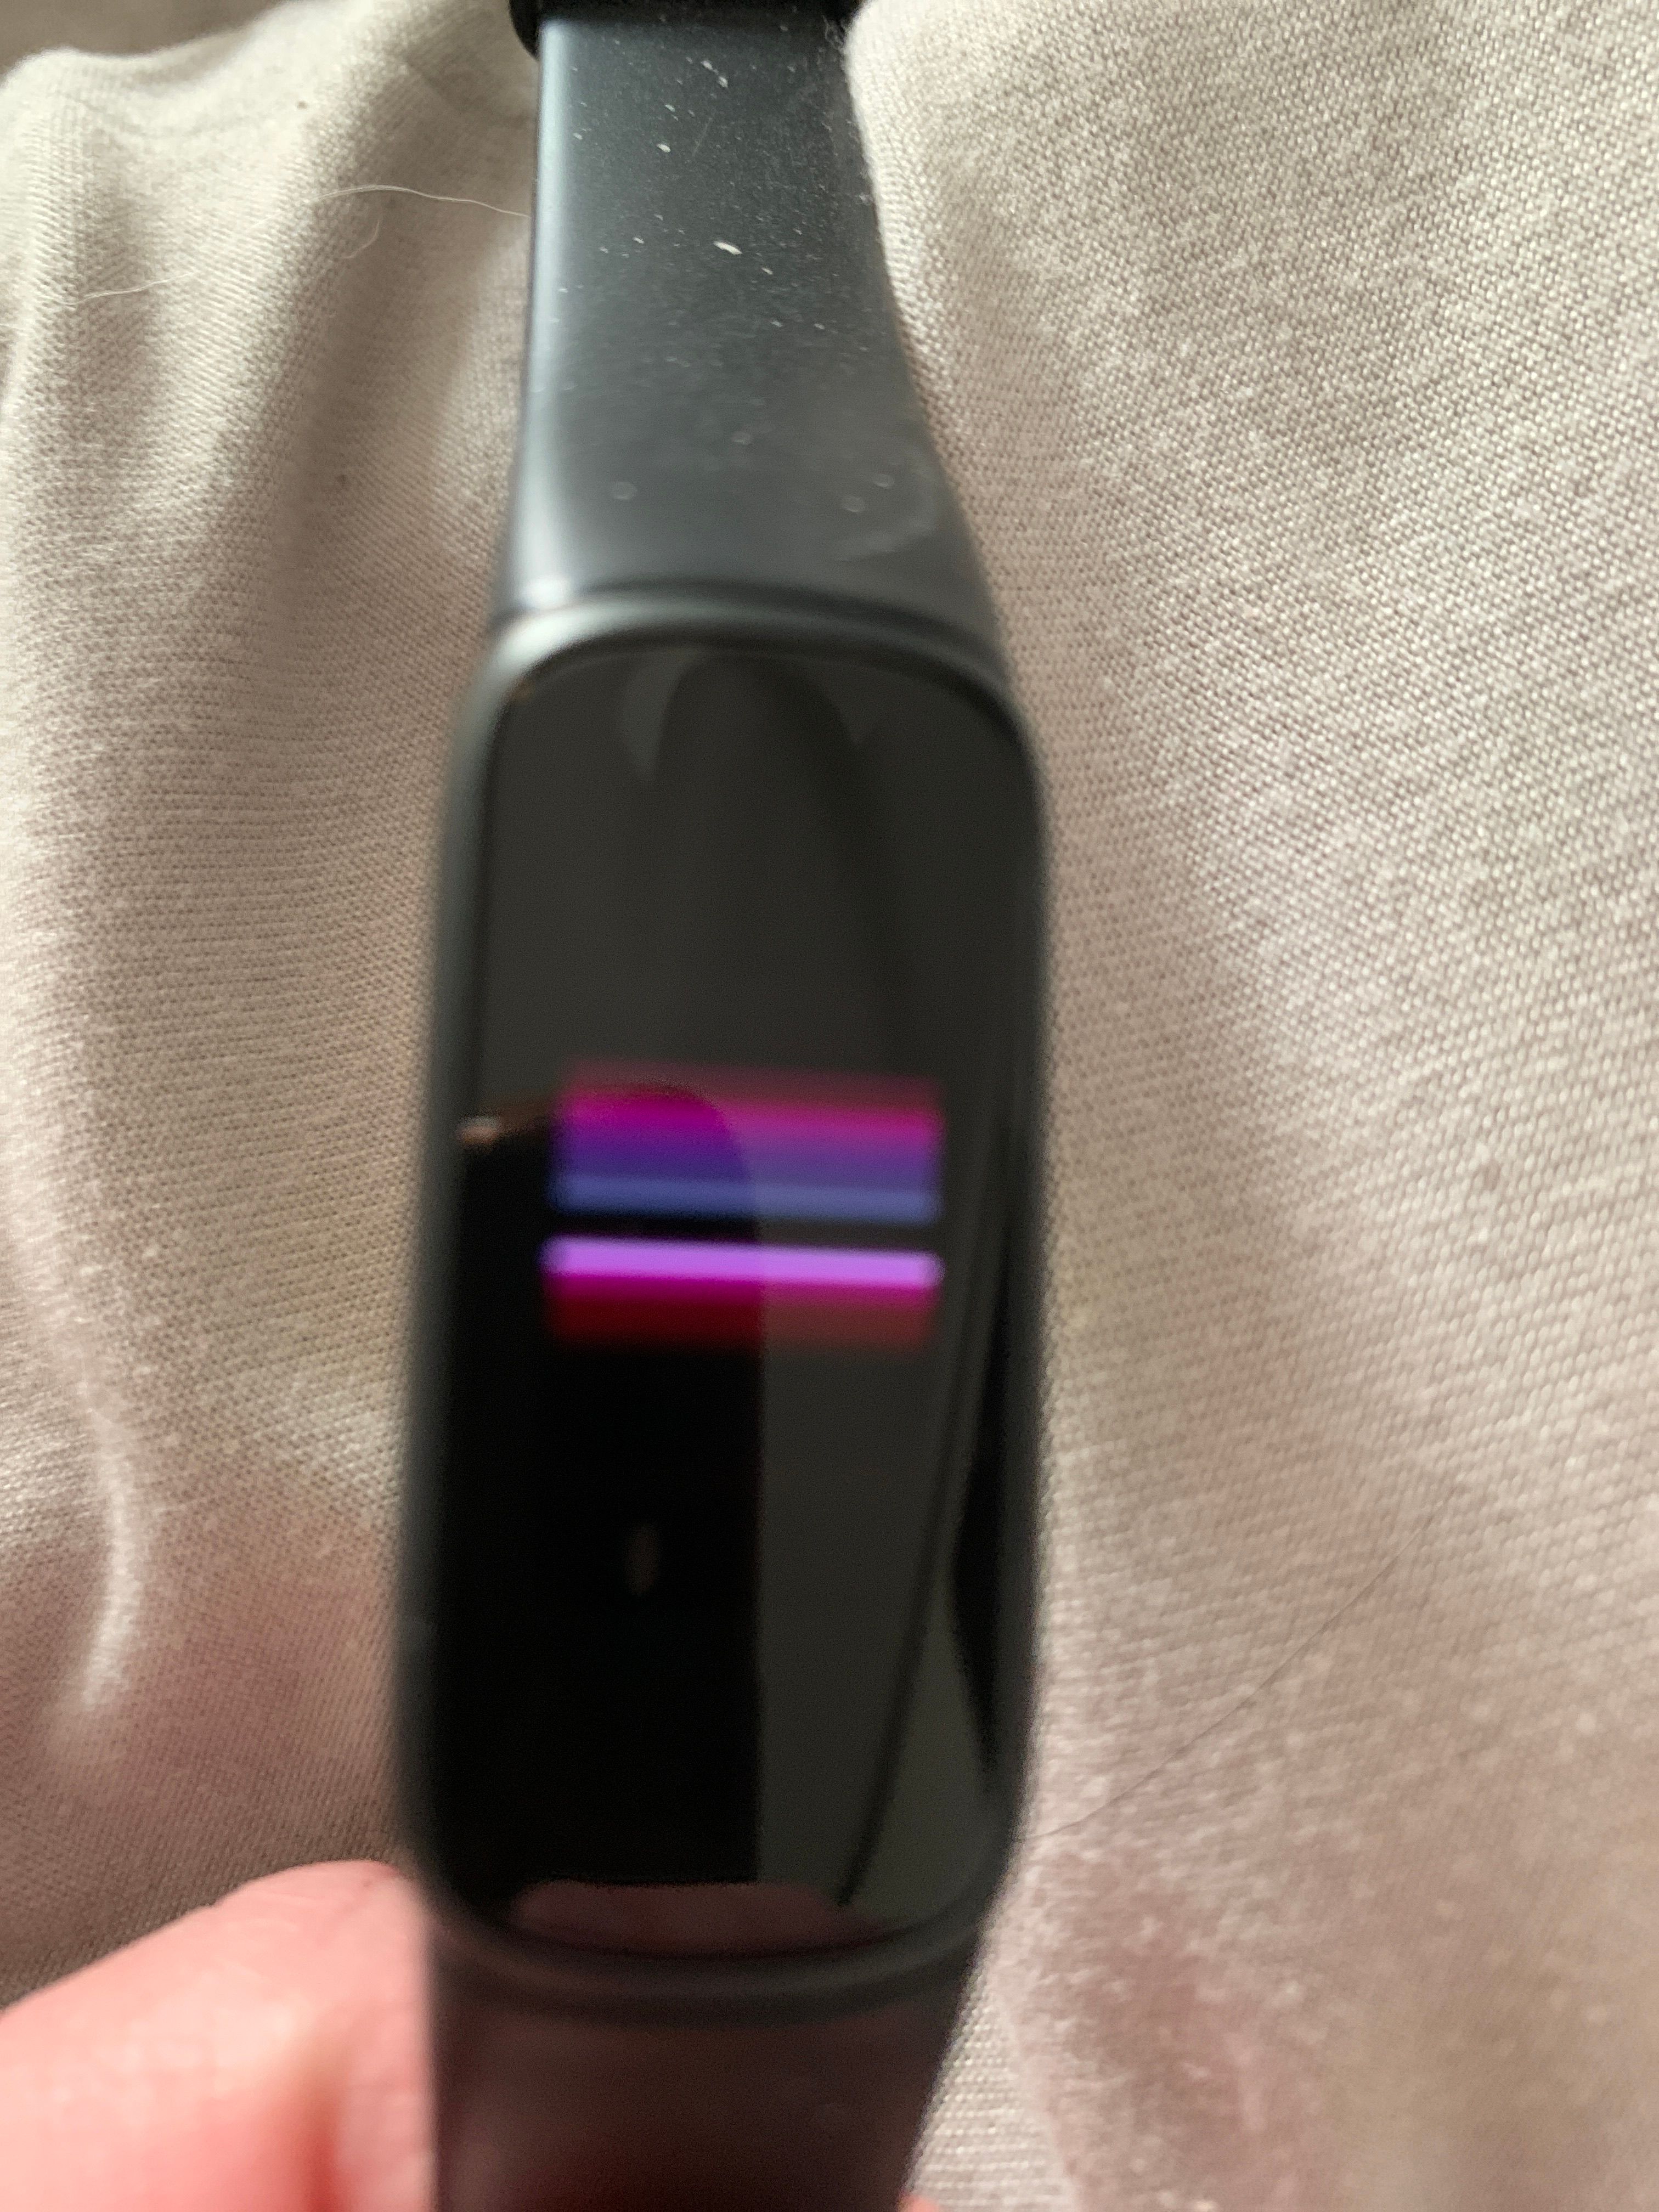 Solved: Luxe screen has lines - Fitbit Community